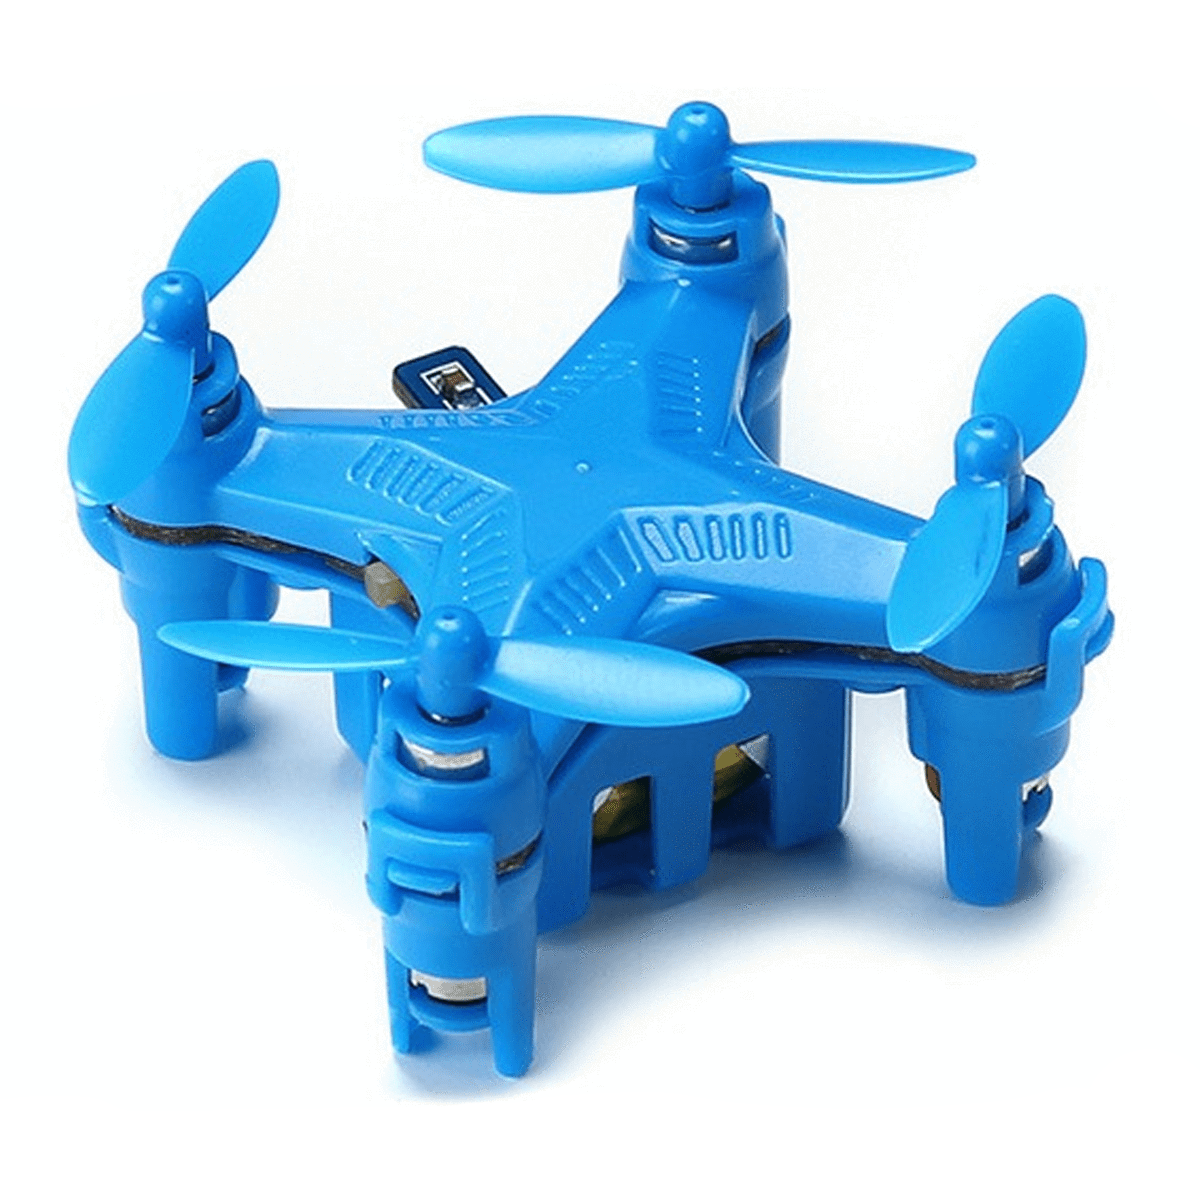 Sylph Fly Model Small Pocket Quadcopter Drone with 6 axis